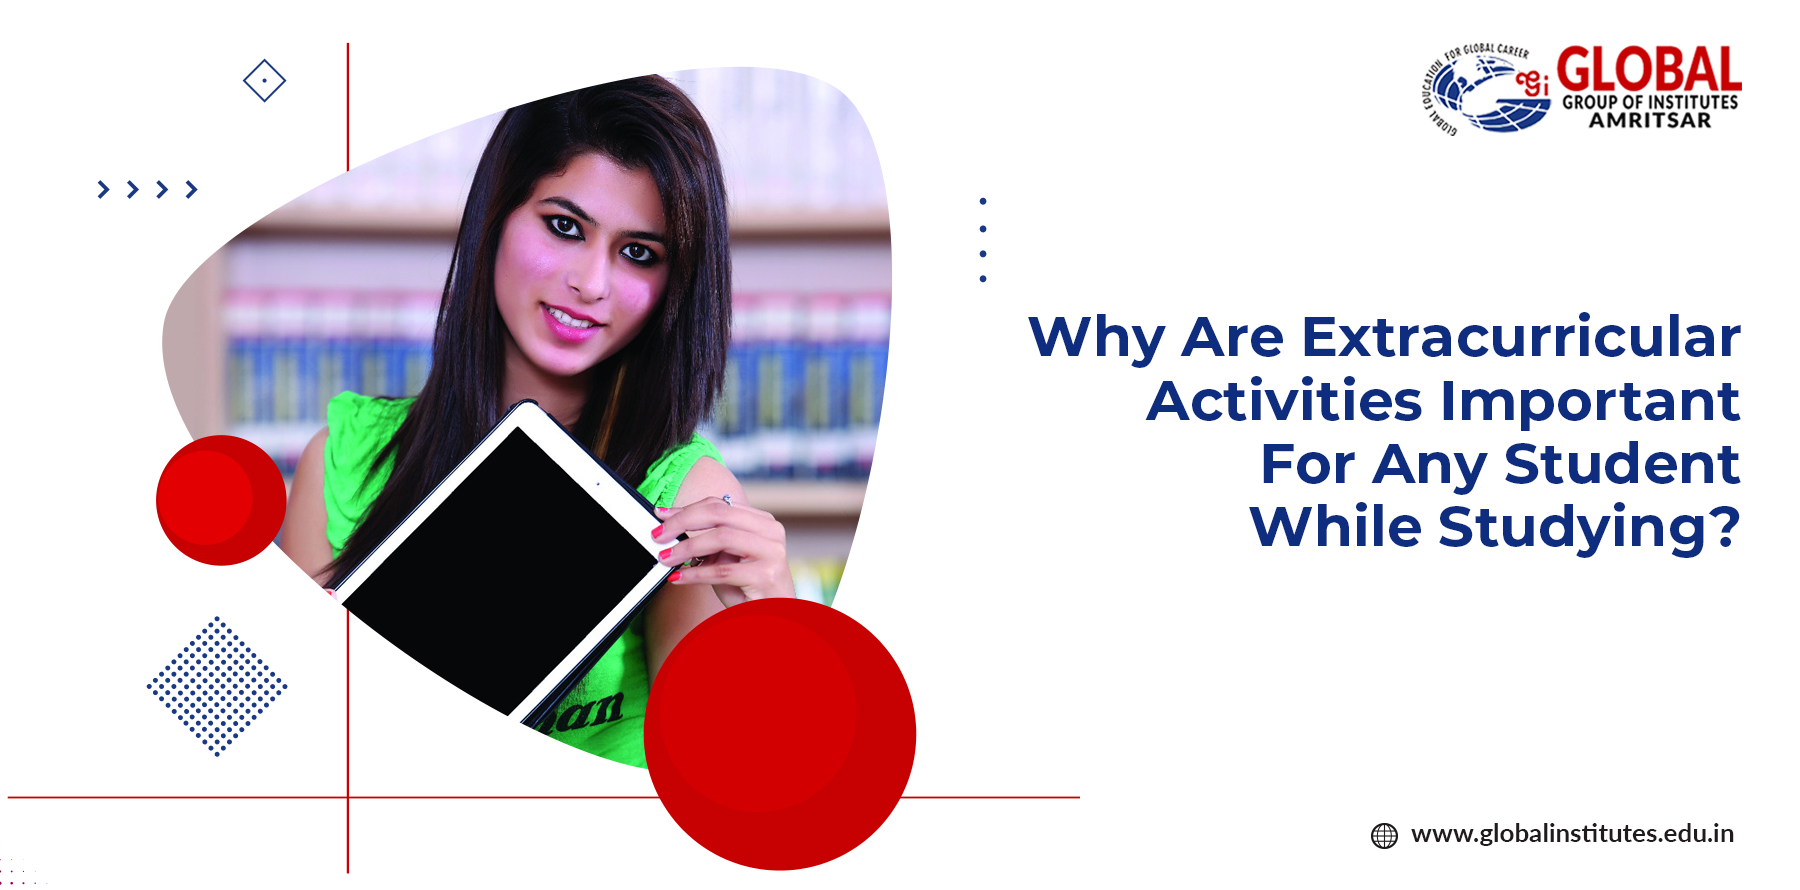 Why Are Extracurricular Activities Important For Any Student While Studying?